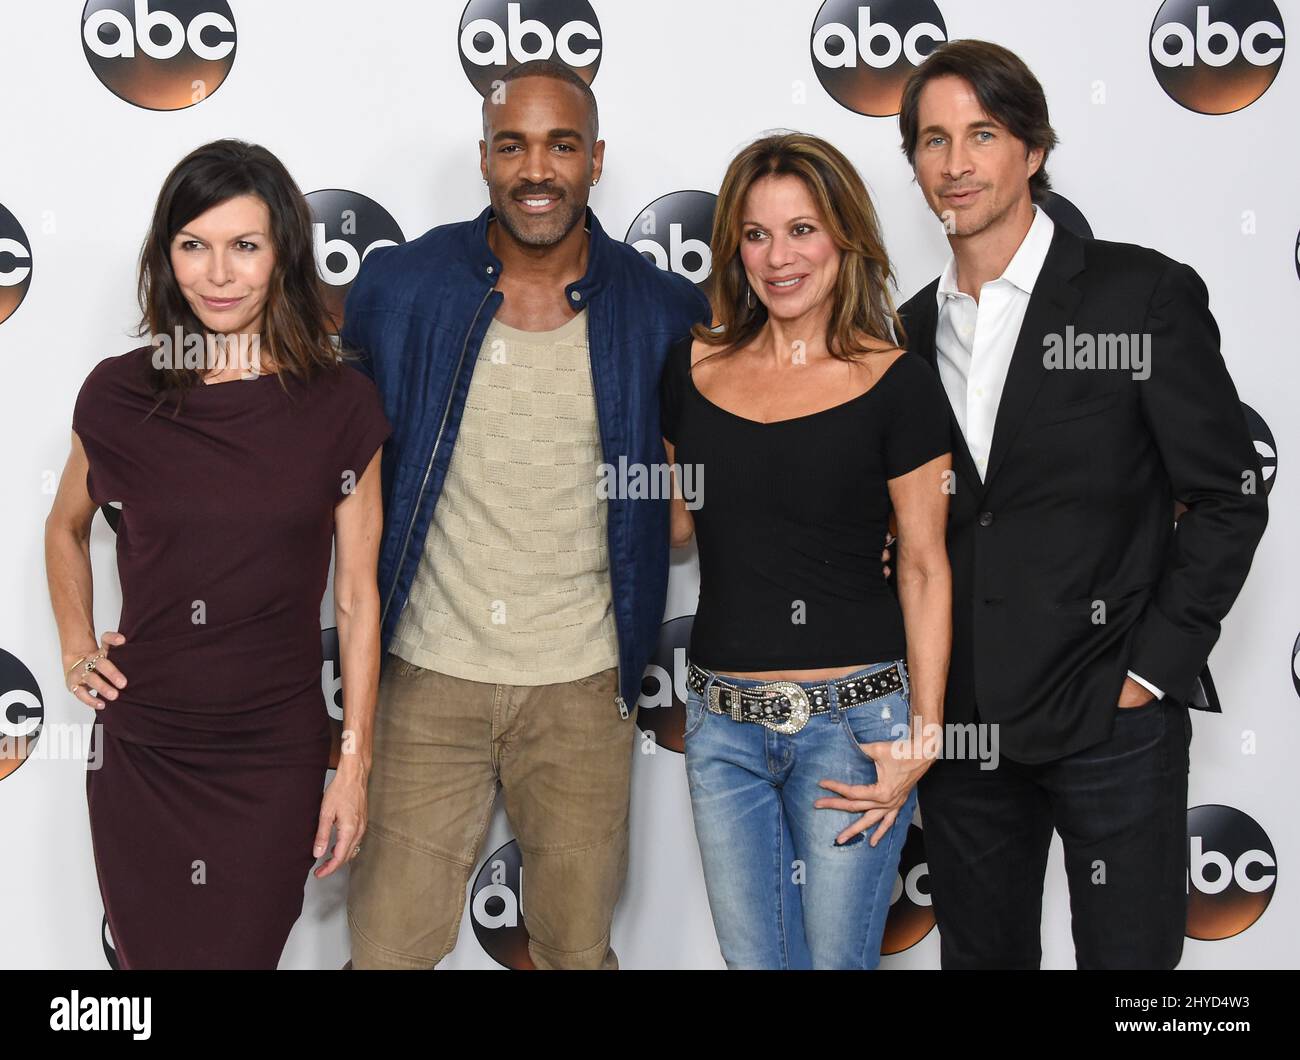 Finola Hughes, Donnell Turner, Nancy Lee Grahn and Michael Easto arriving for the Disney ABC TCA Summer Press Tour held at the Beverly Hilton Hotel, Beverly Hills, Los Angeles Stock Photo